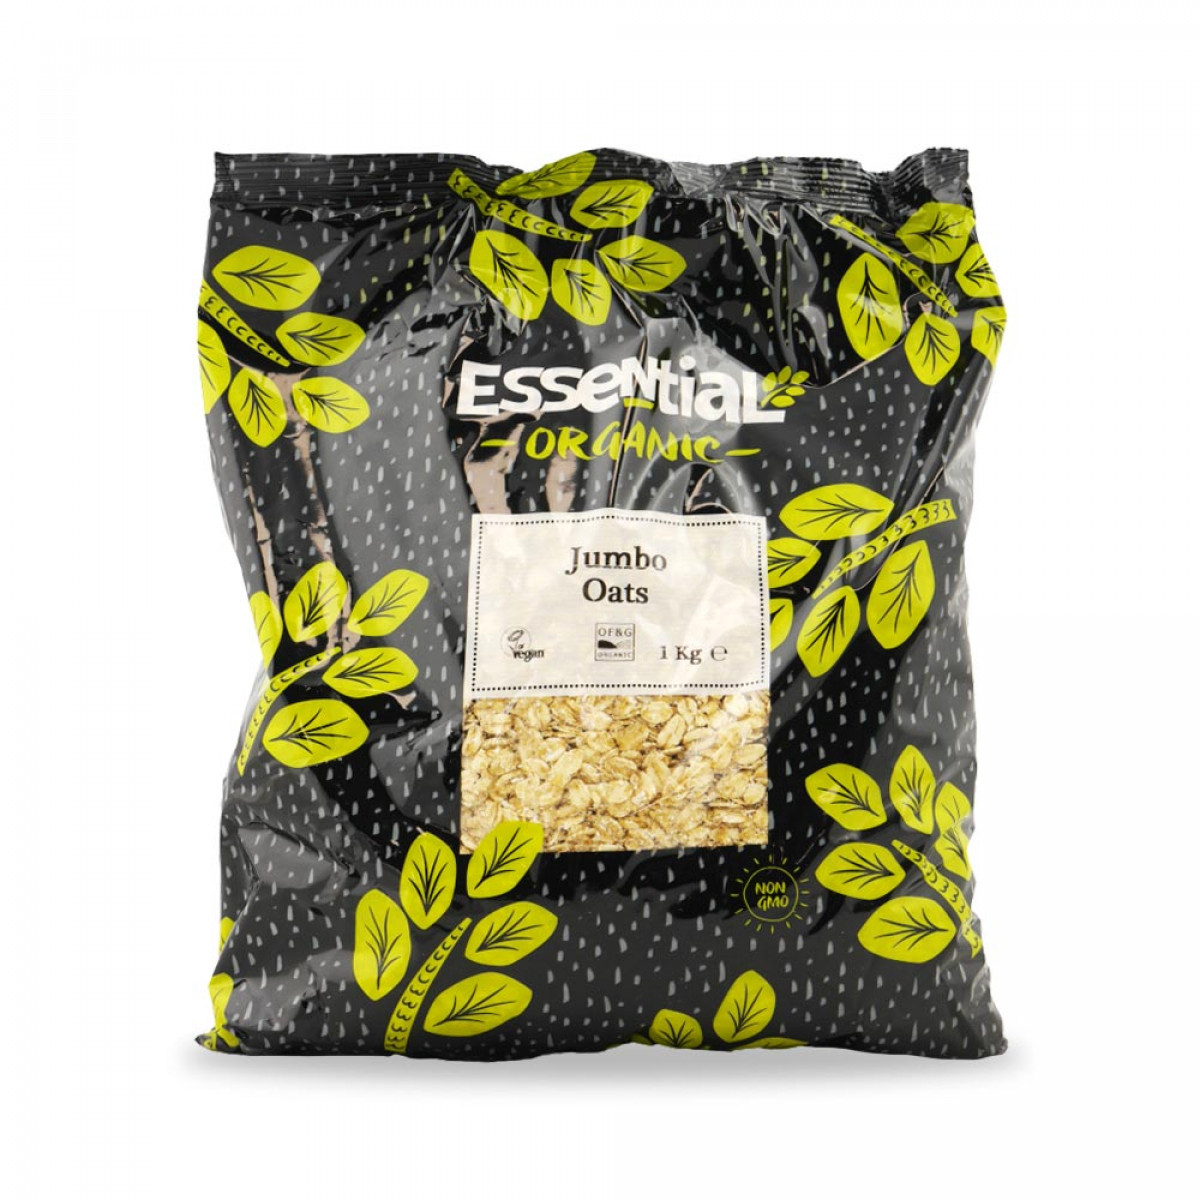 Product picture for Oats - Jumbo